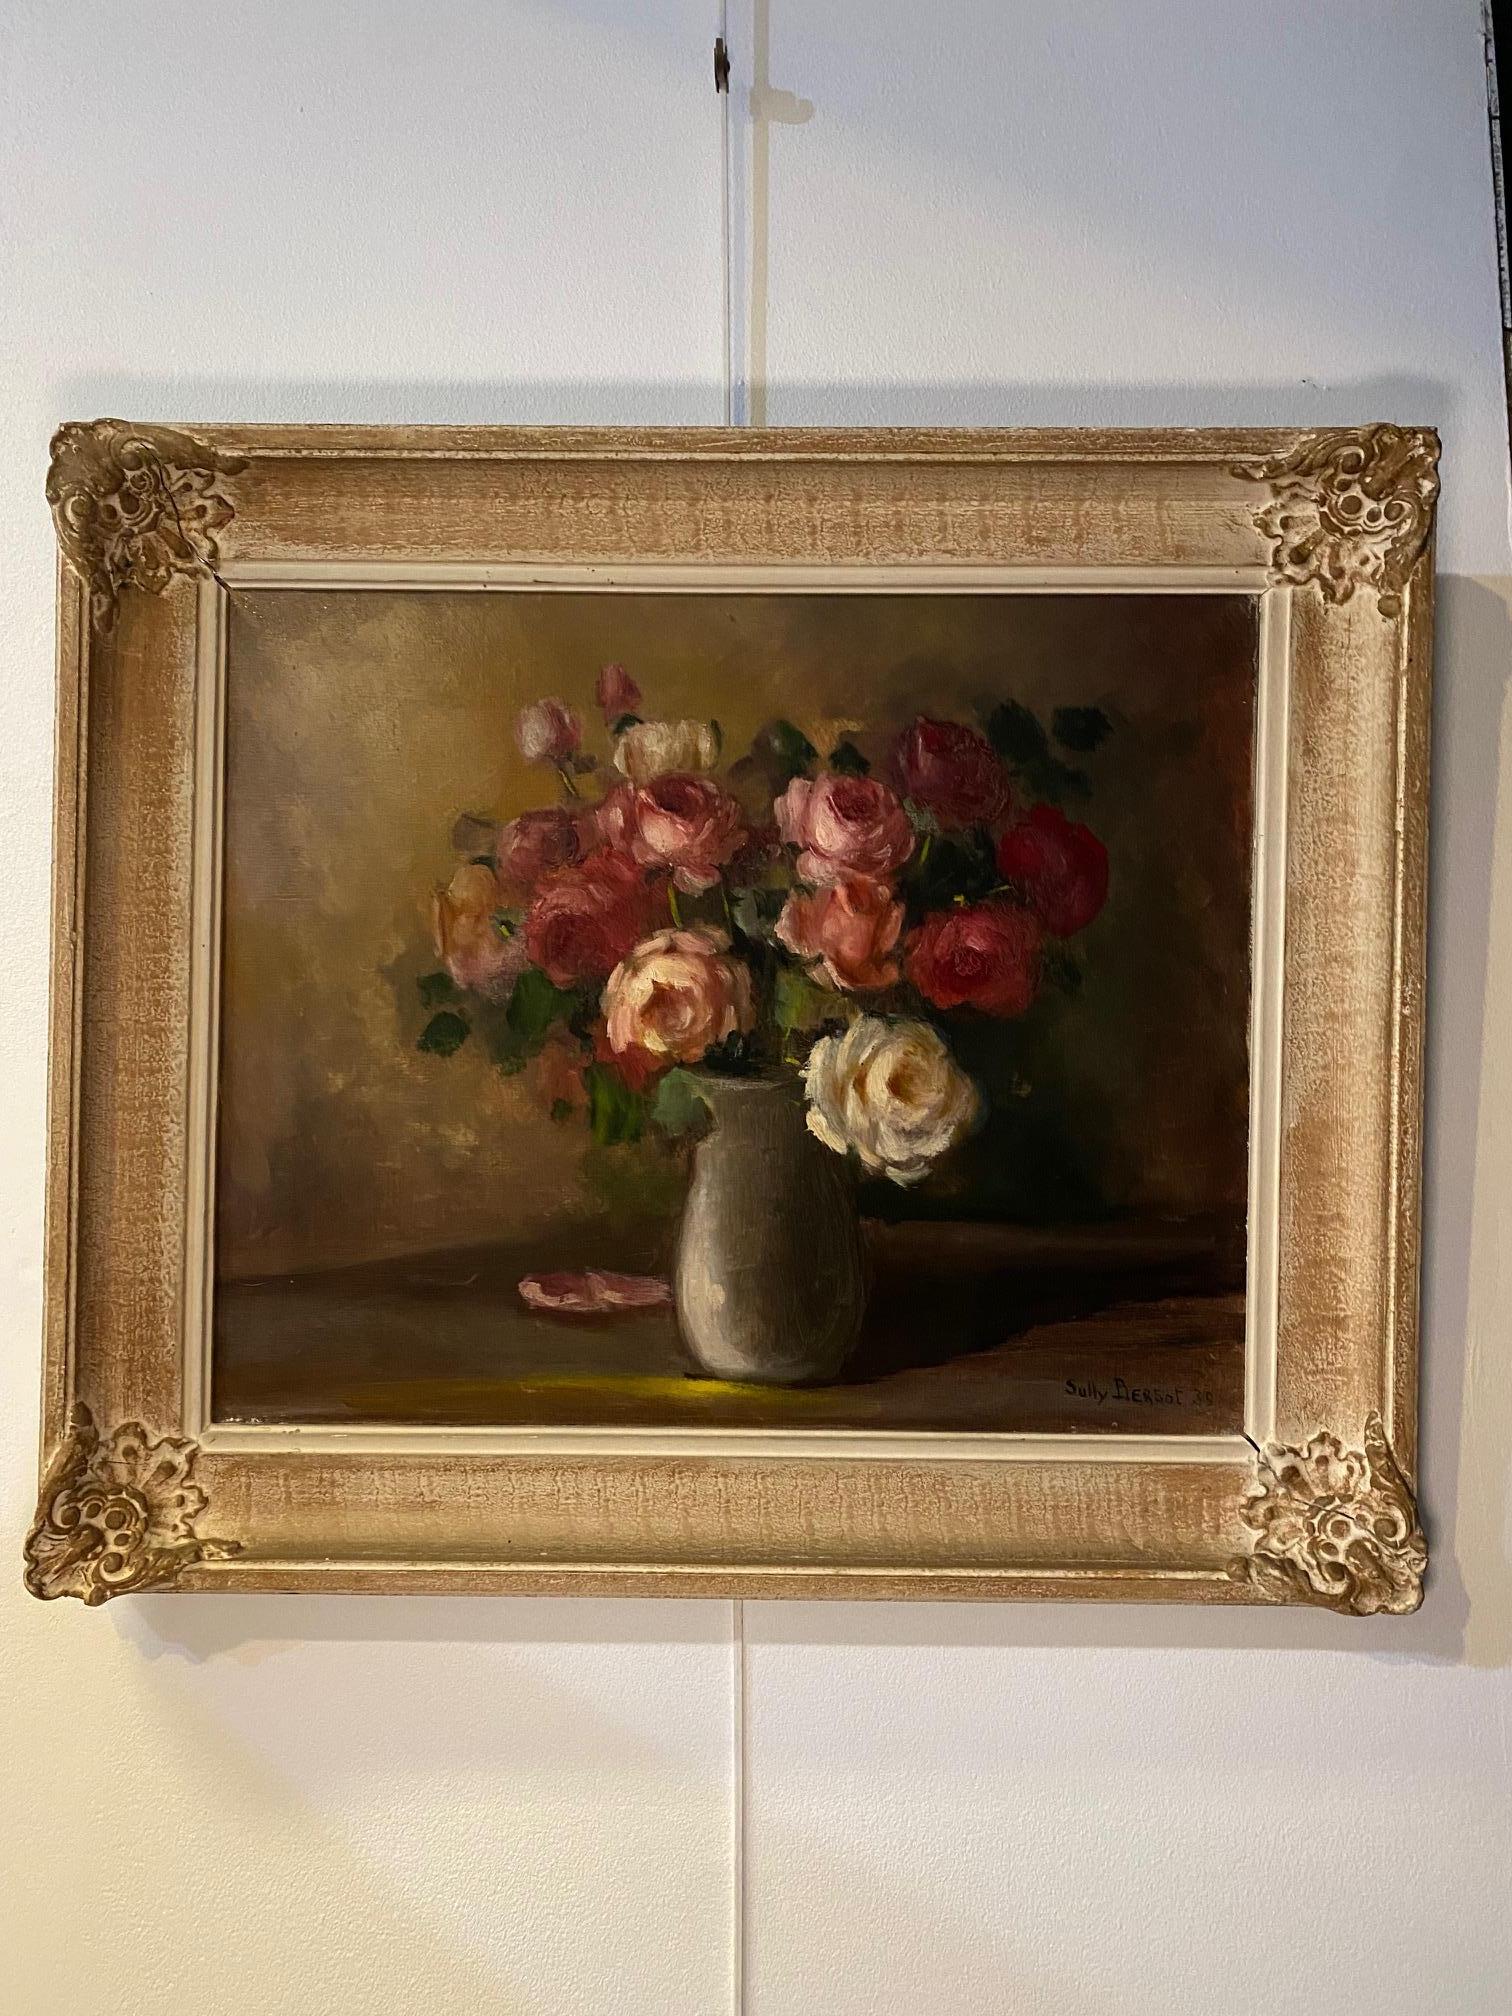 Roses bouquet by Sully Bersot - Oil on canvas 44x54 cm For Sale 2